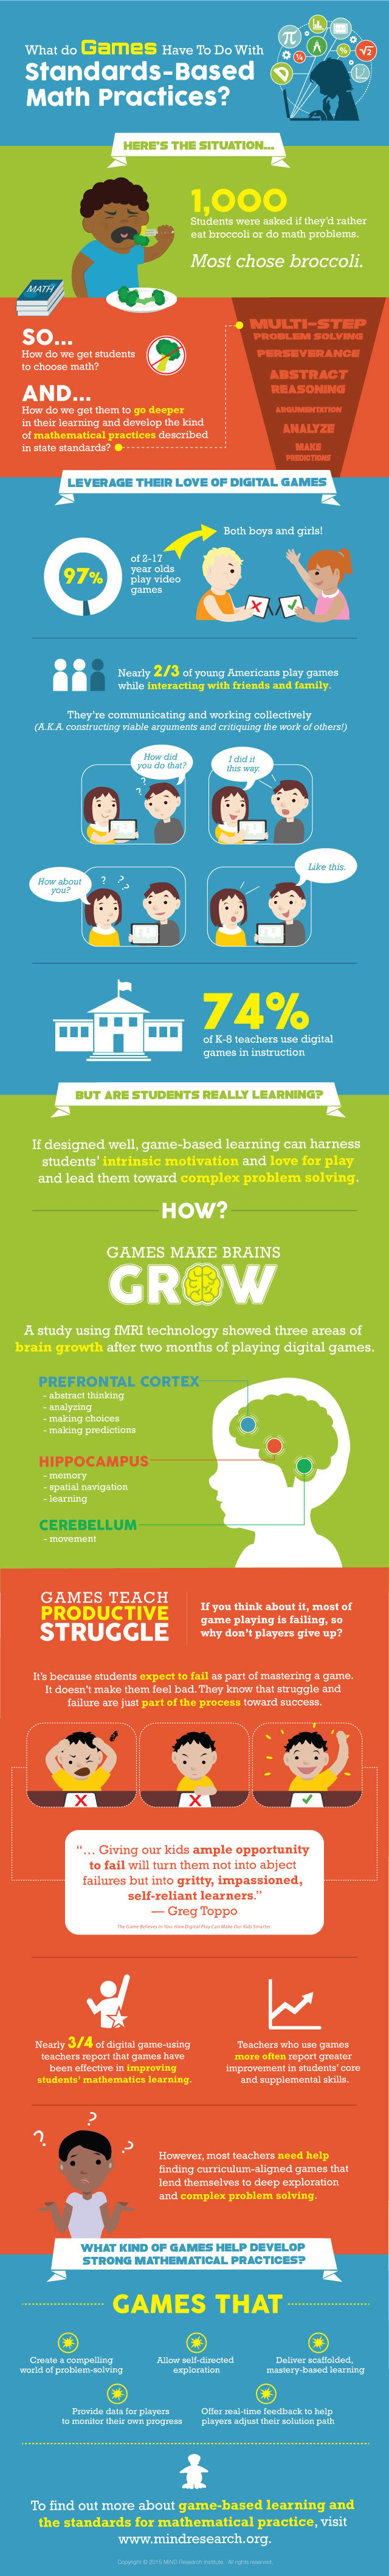 Standards-based Math in Game-based Learning Infographic